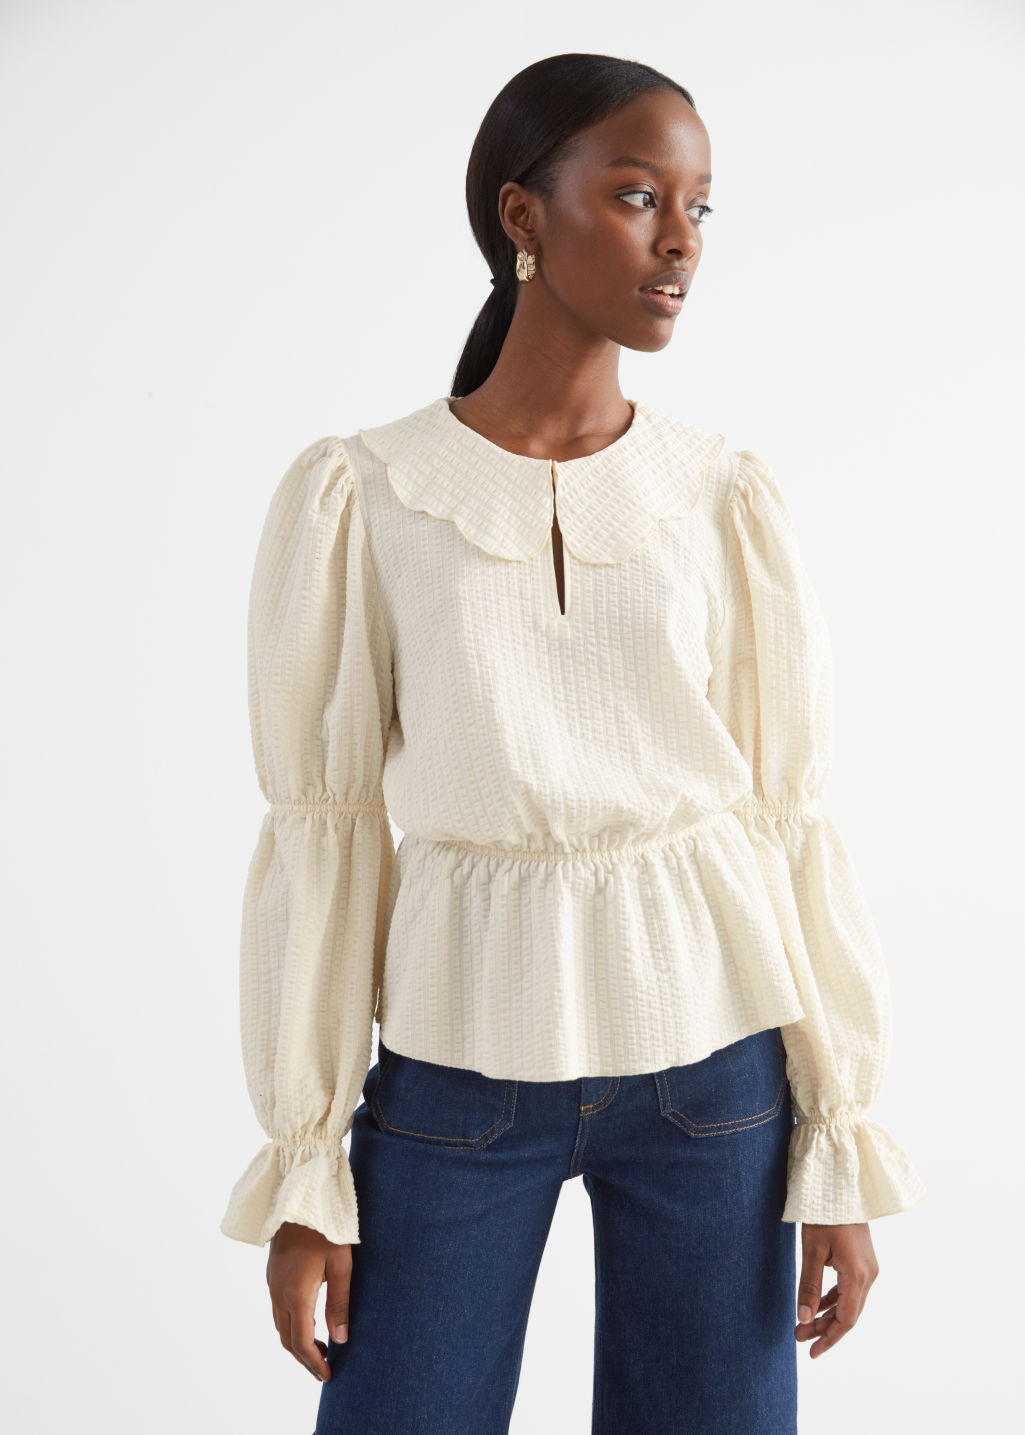 Waffled Scallop Collar Smock Top - Cream - Tops & T-shirts - & Other Stories